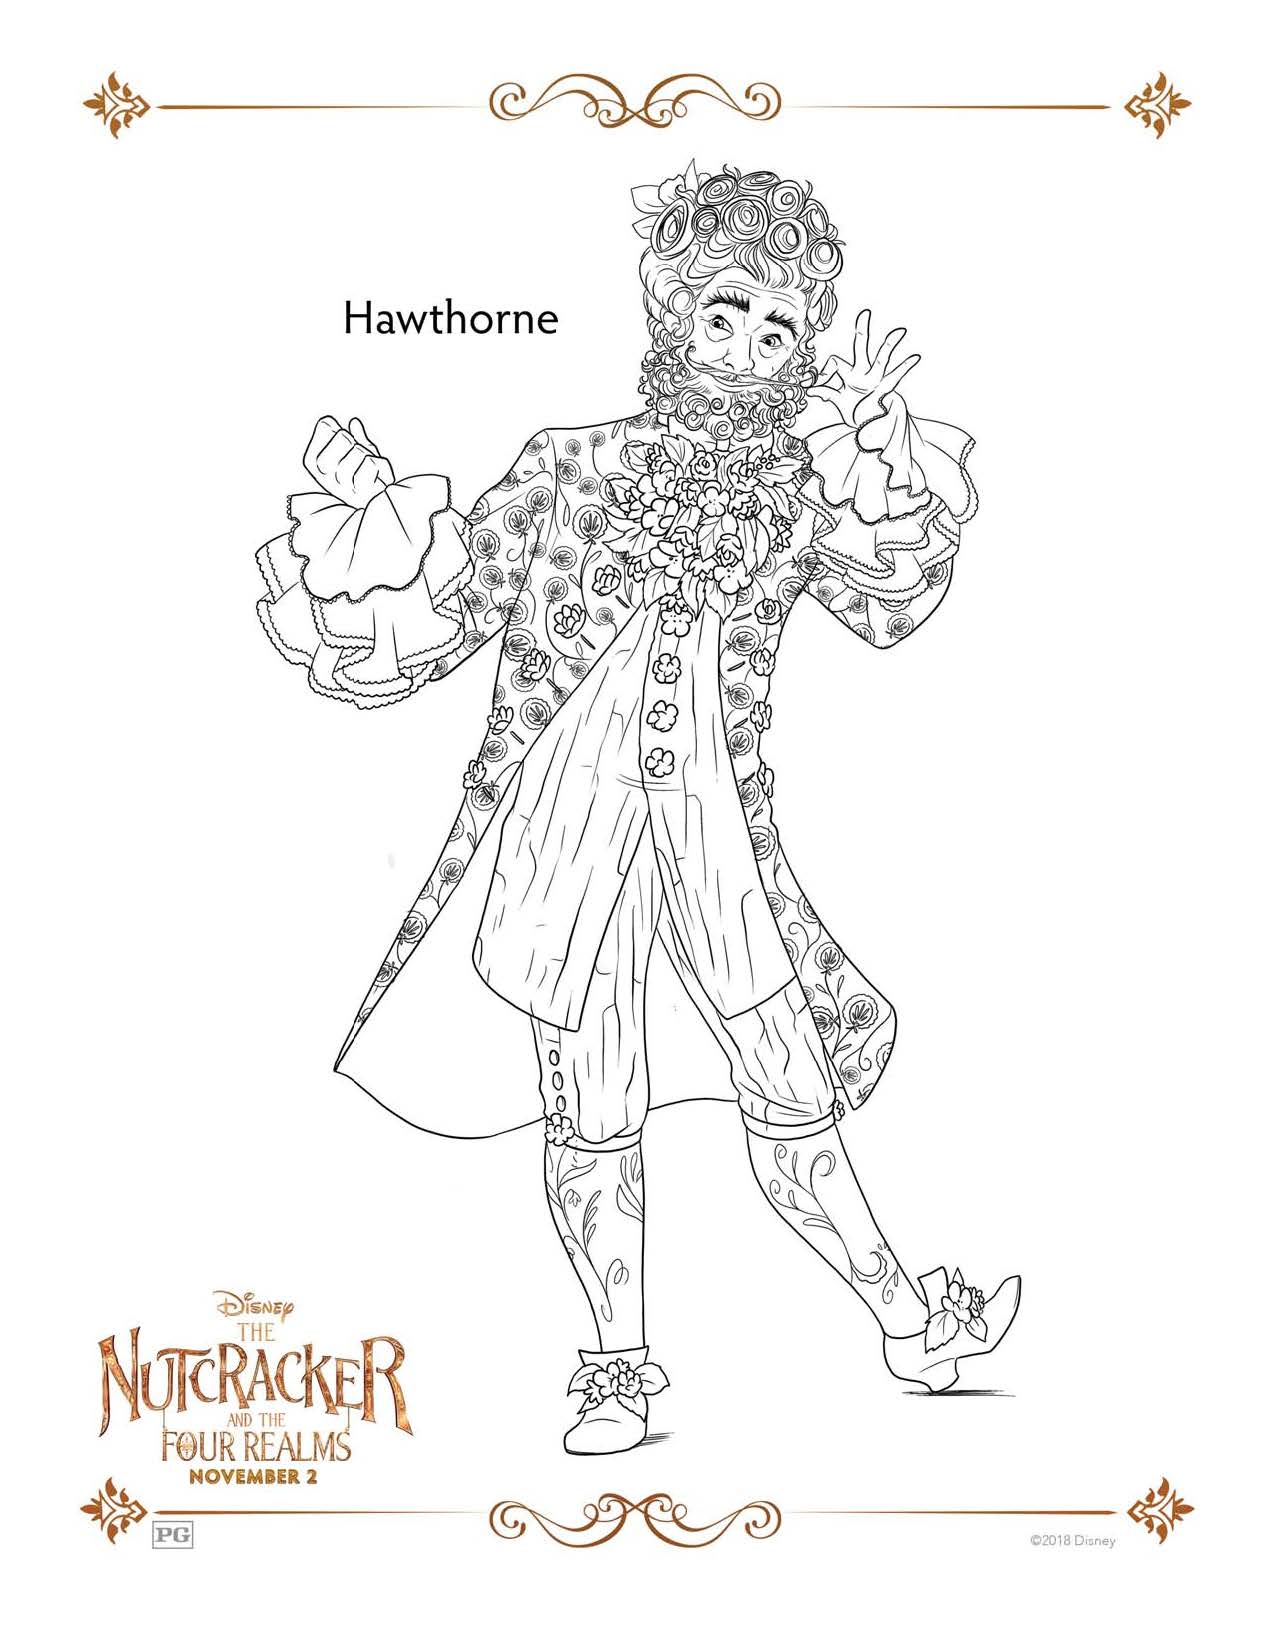 Hawthorne - The Nutcracker and The Four Realms Coloring Pages and Activity Sheets